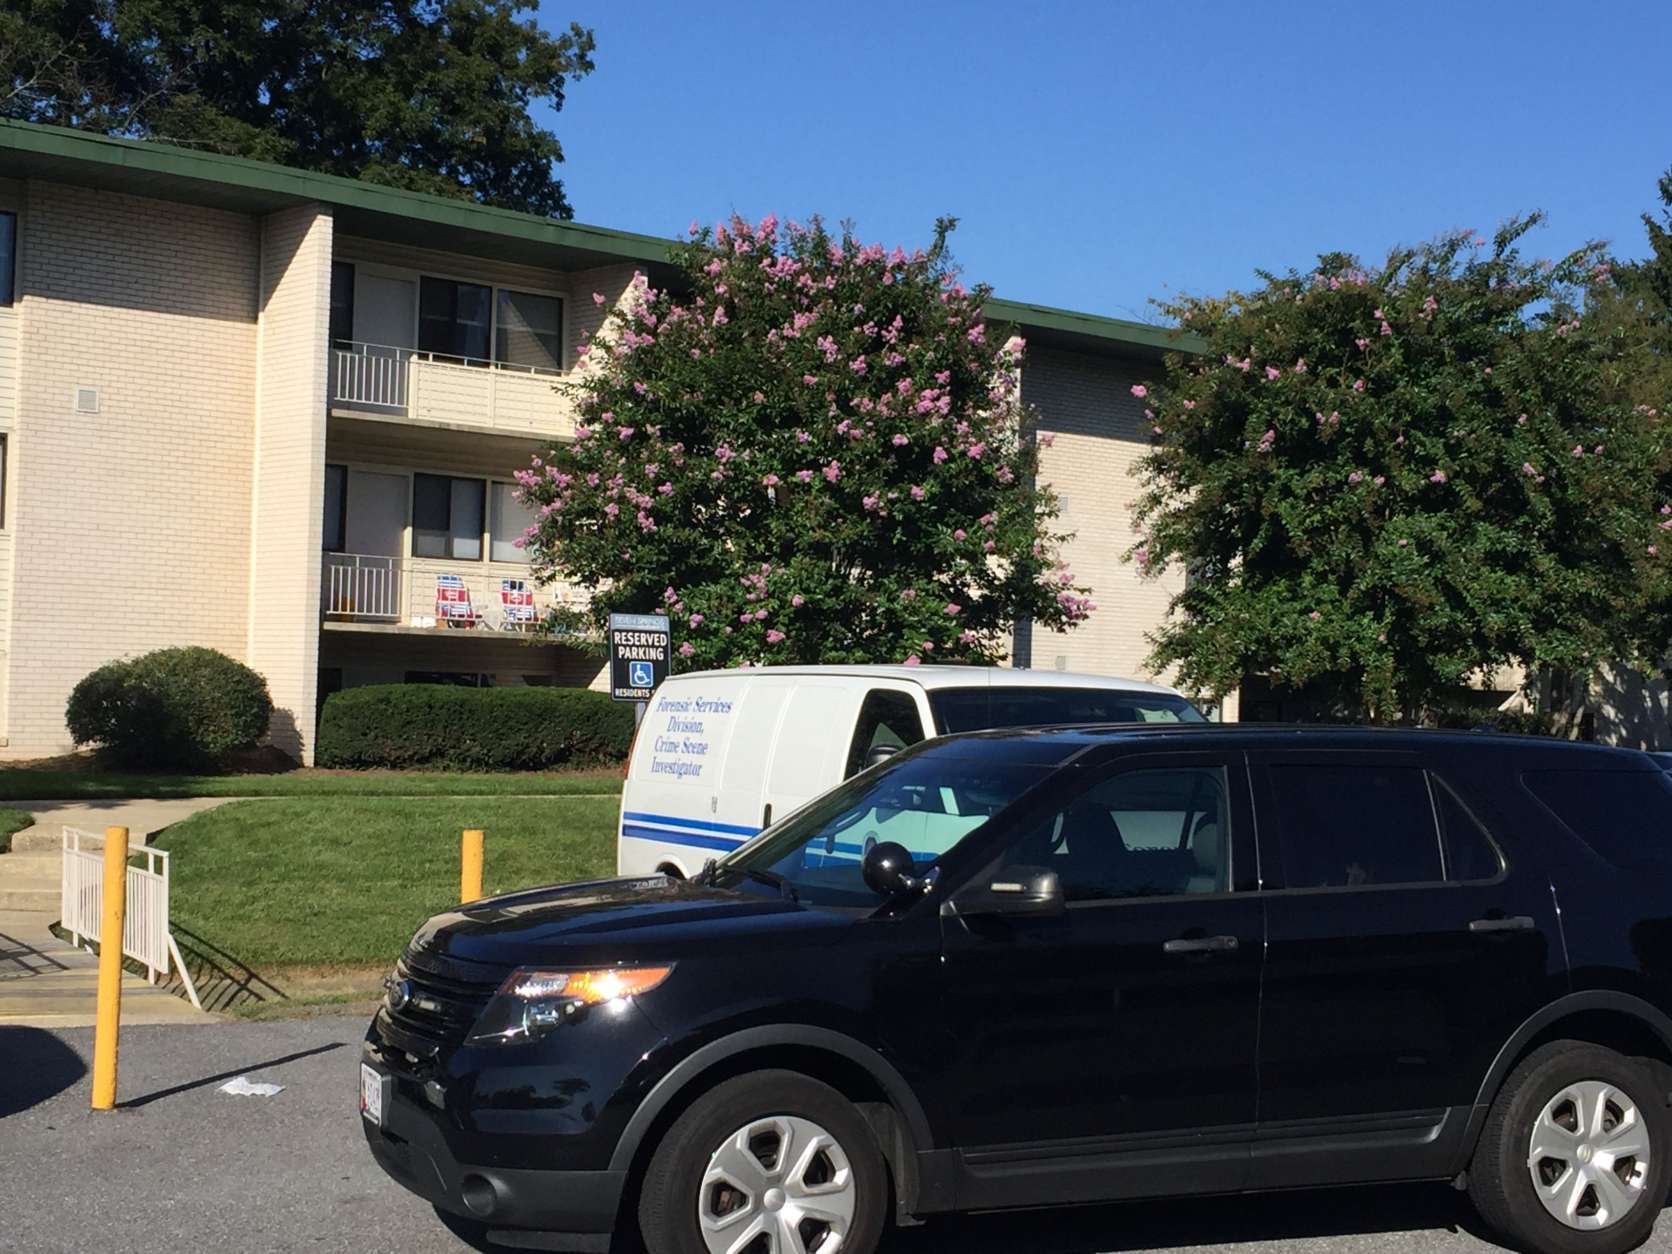 Two men were shot early Sunday at the Seven Springs Apartment Complex in College Park. One died after being taken to the hospital; the other is still listed in critical condition. (WTOP/John Domen)